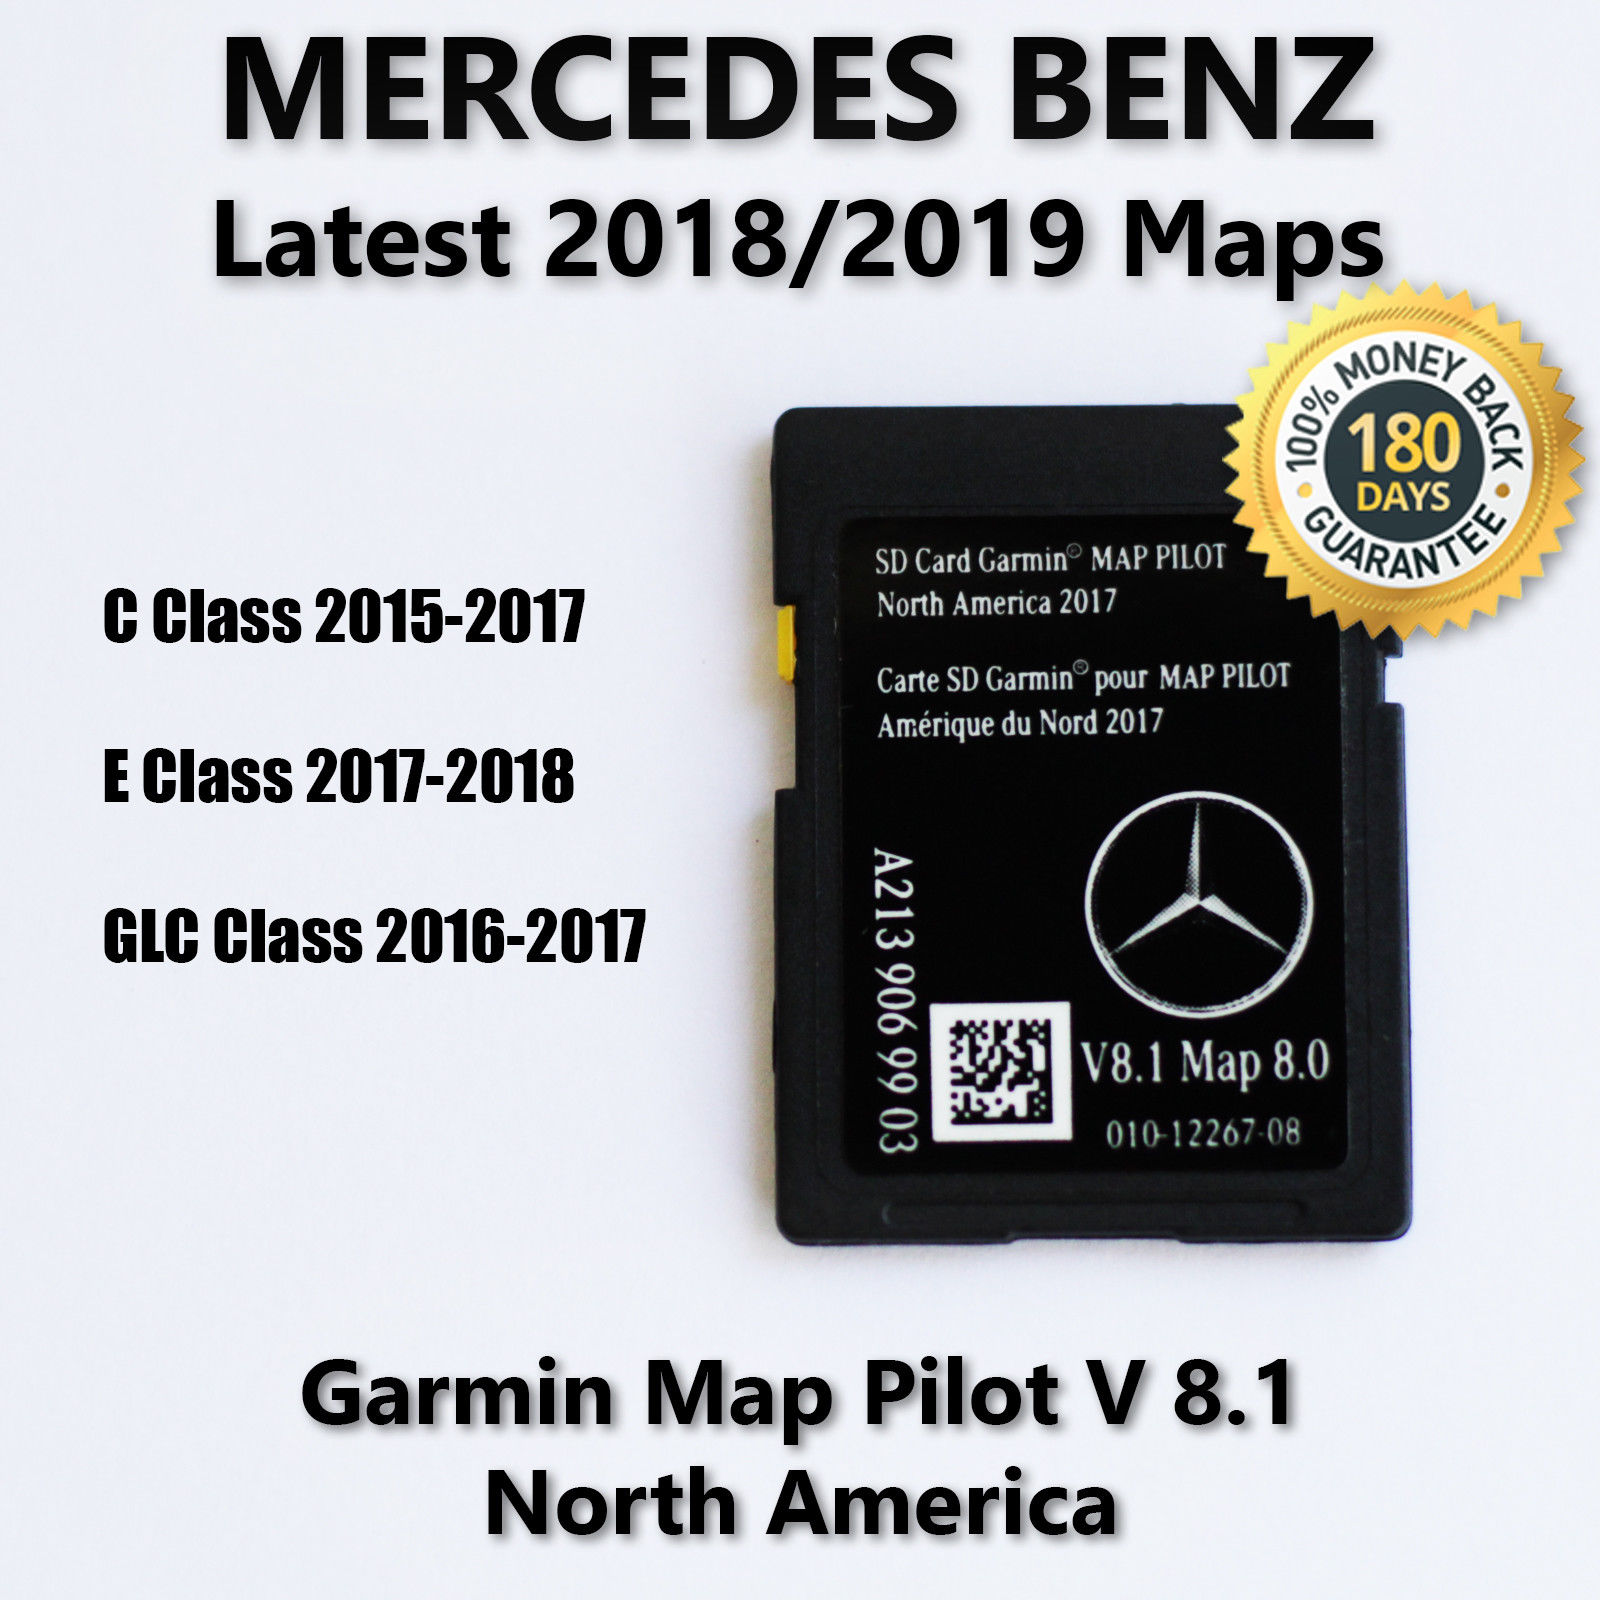 residue Burma Dynamics 2015-2017 Mercedes-Benz SD Card GPS Navigation GLC E C-Class Garmin Map  Pilot 2022 2023 is in stock and for sale - Price & Review 2022 2023